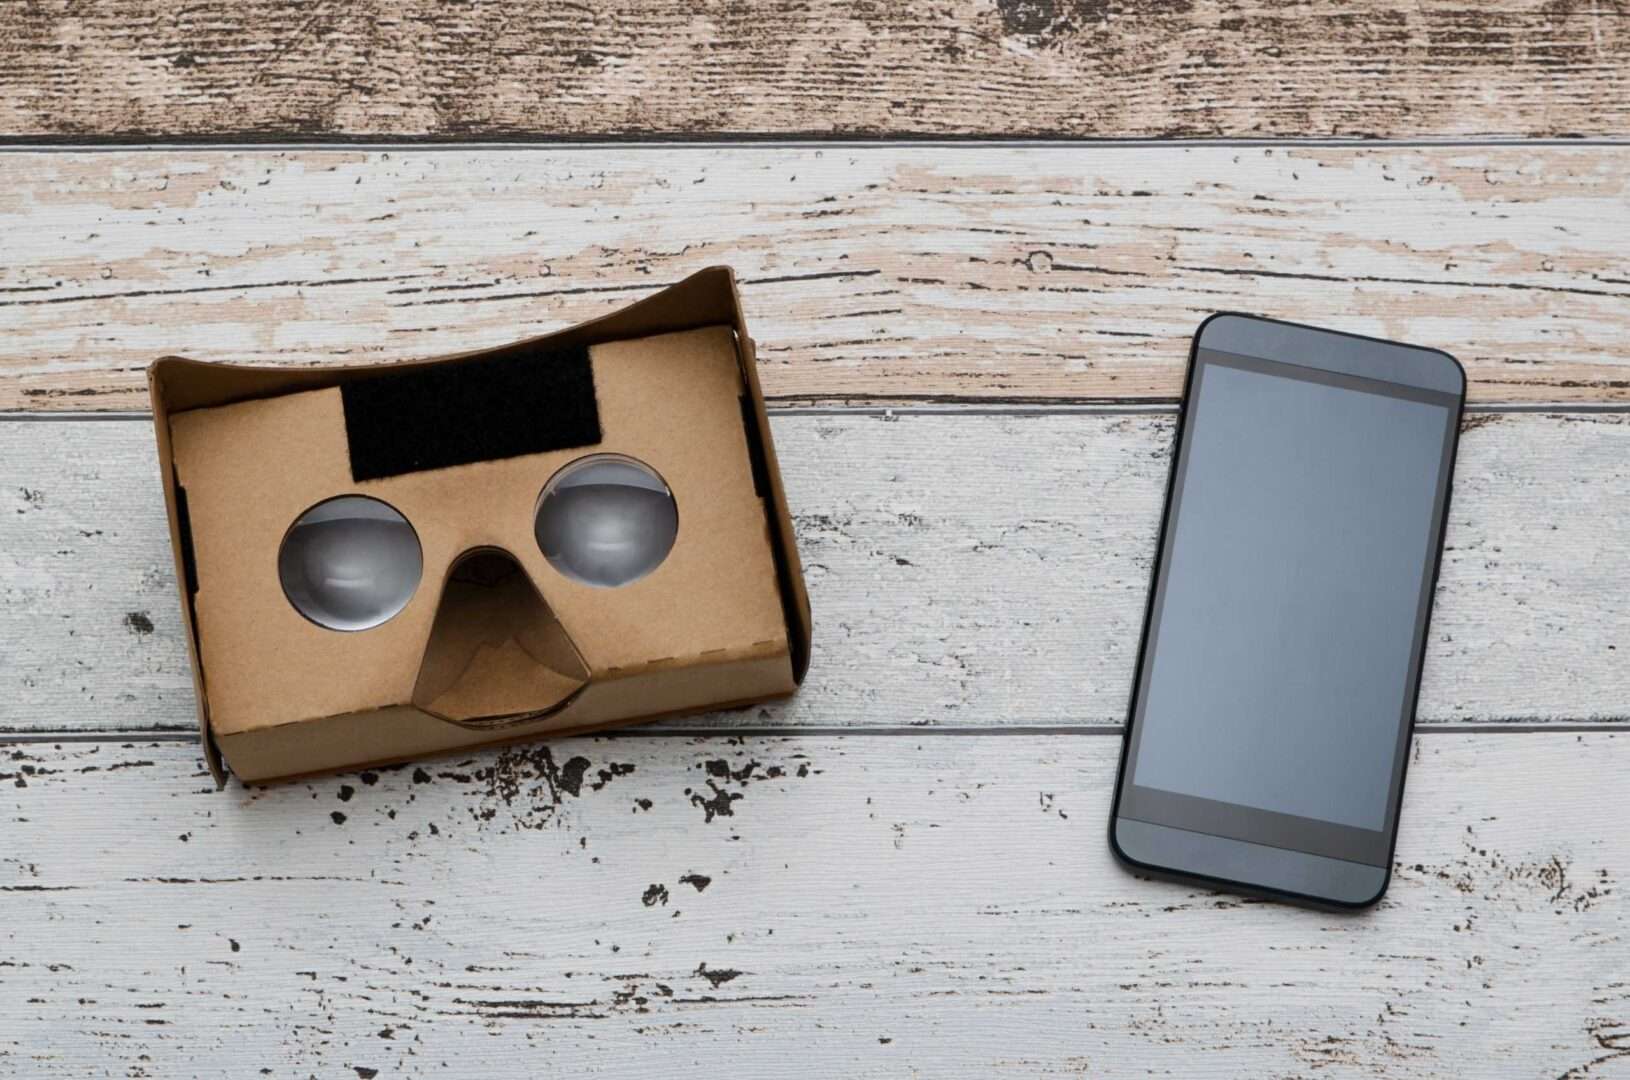 the goog le cardboard style vr headset looks like this.